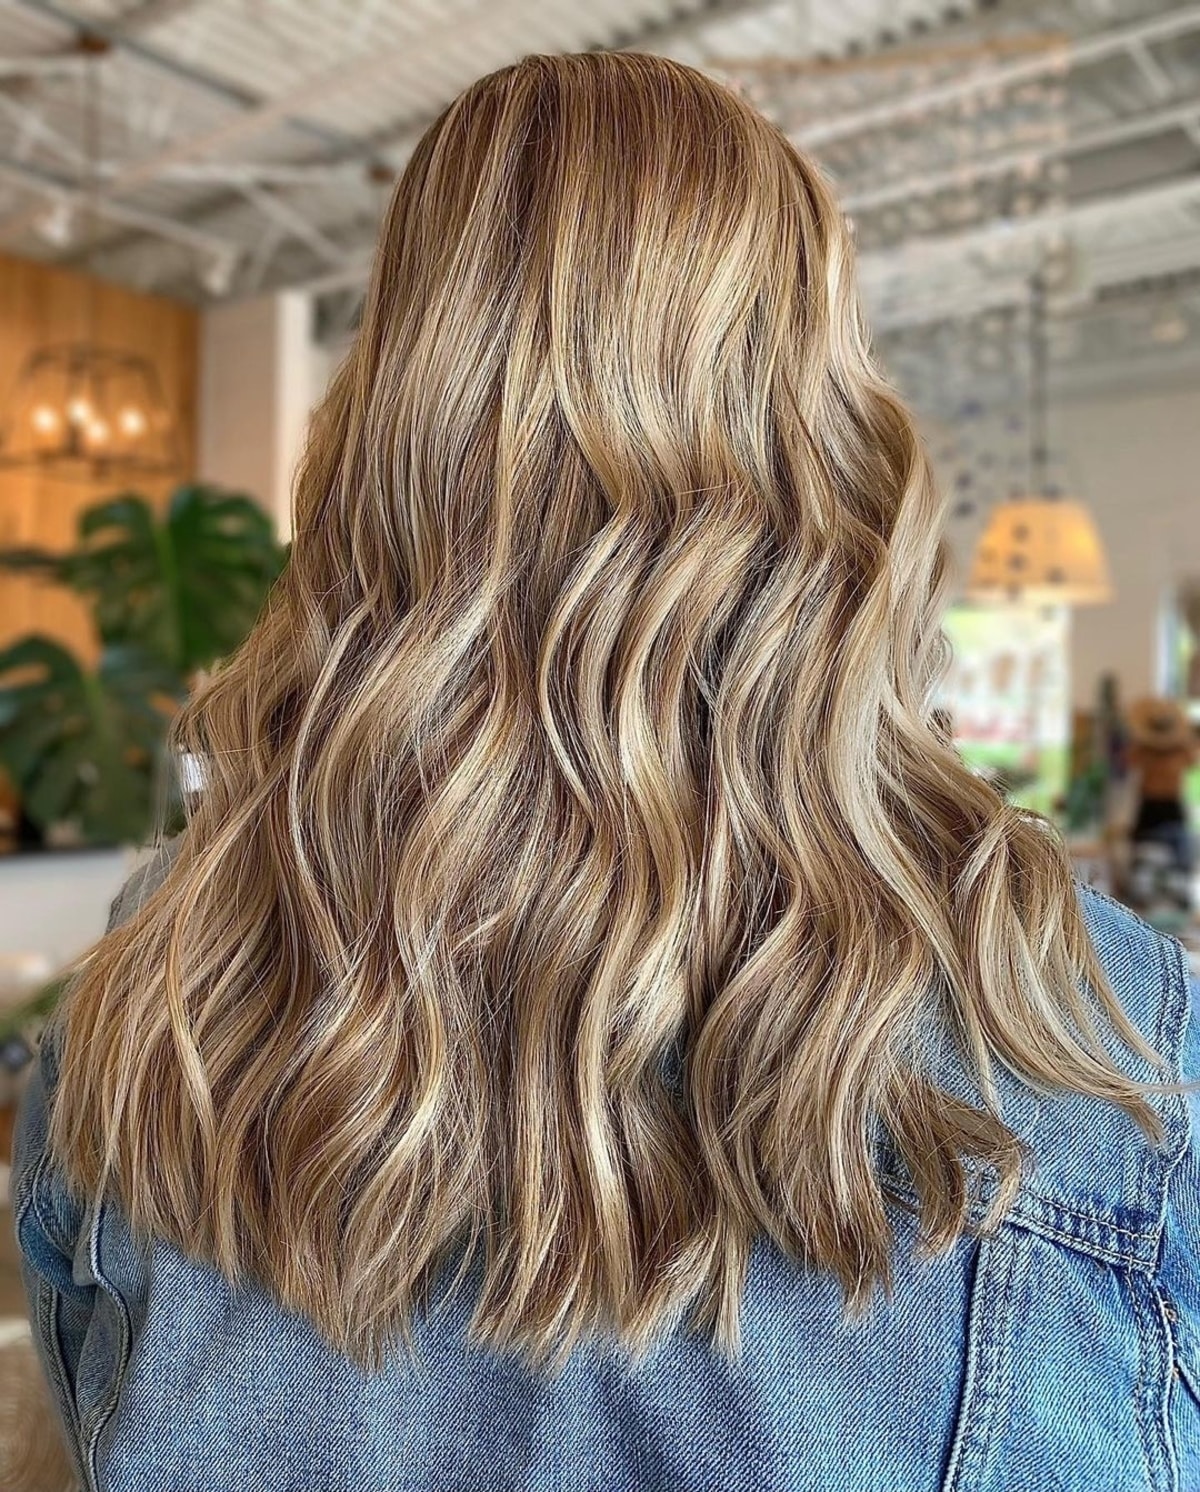 19 Best Champagne Blonde Hair Color Ideas for Every Skin Tone